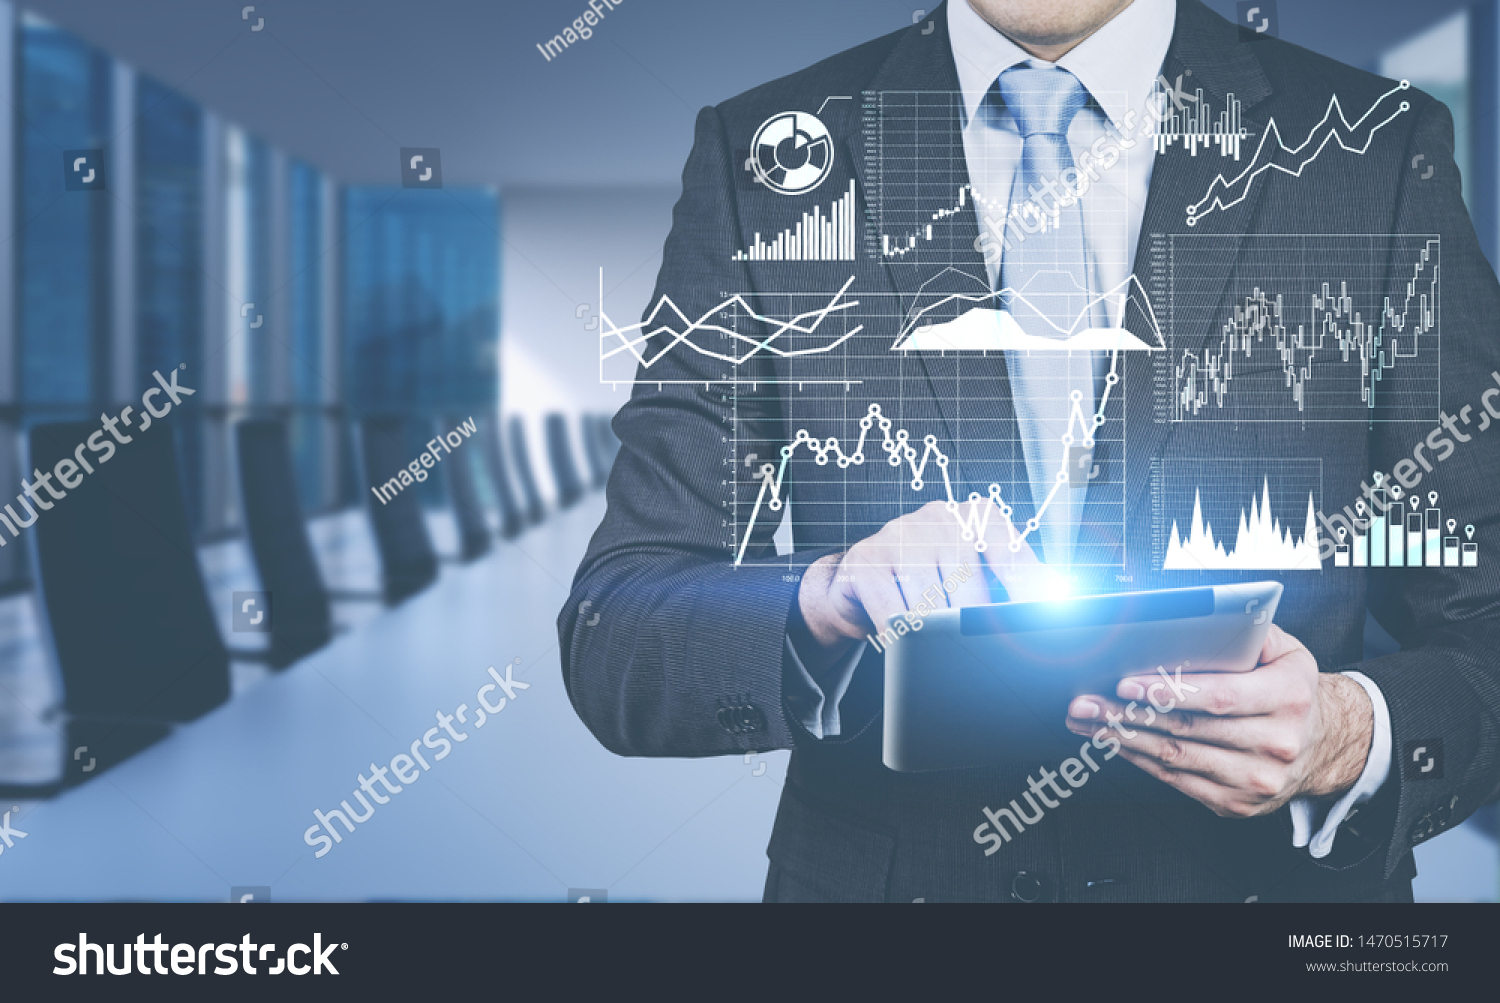 Businessman using tablet computer in blurred meeting room with double exposure of graphs and business infographics. Concept of trading and market analysis. Toned image #1470515717